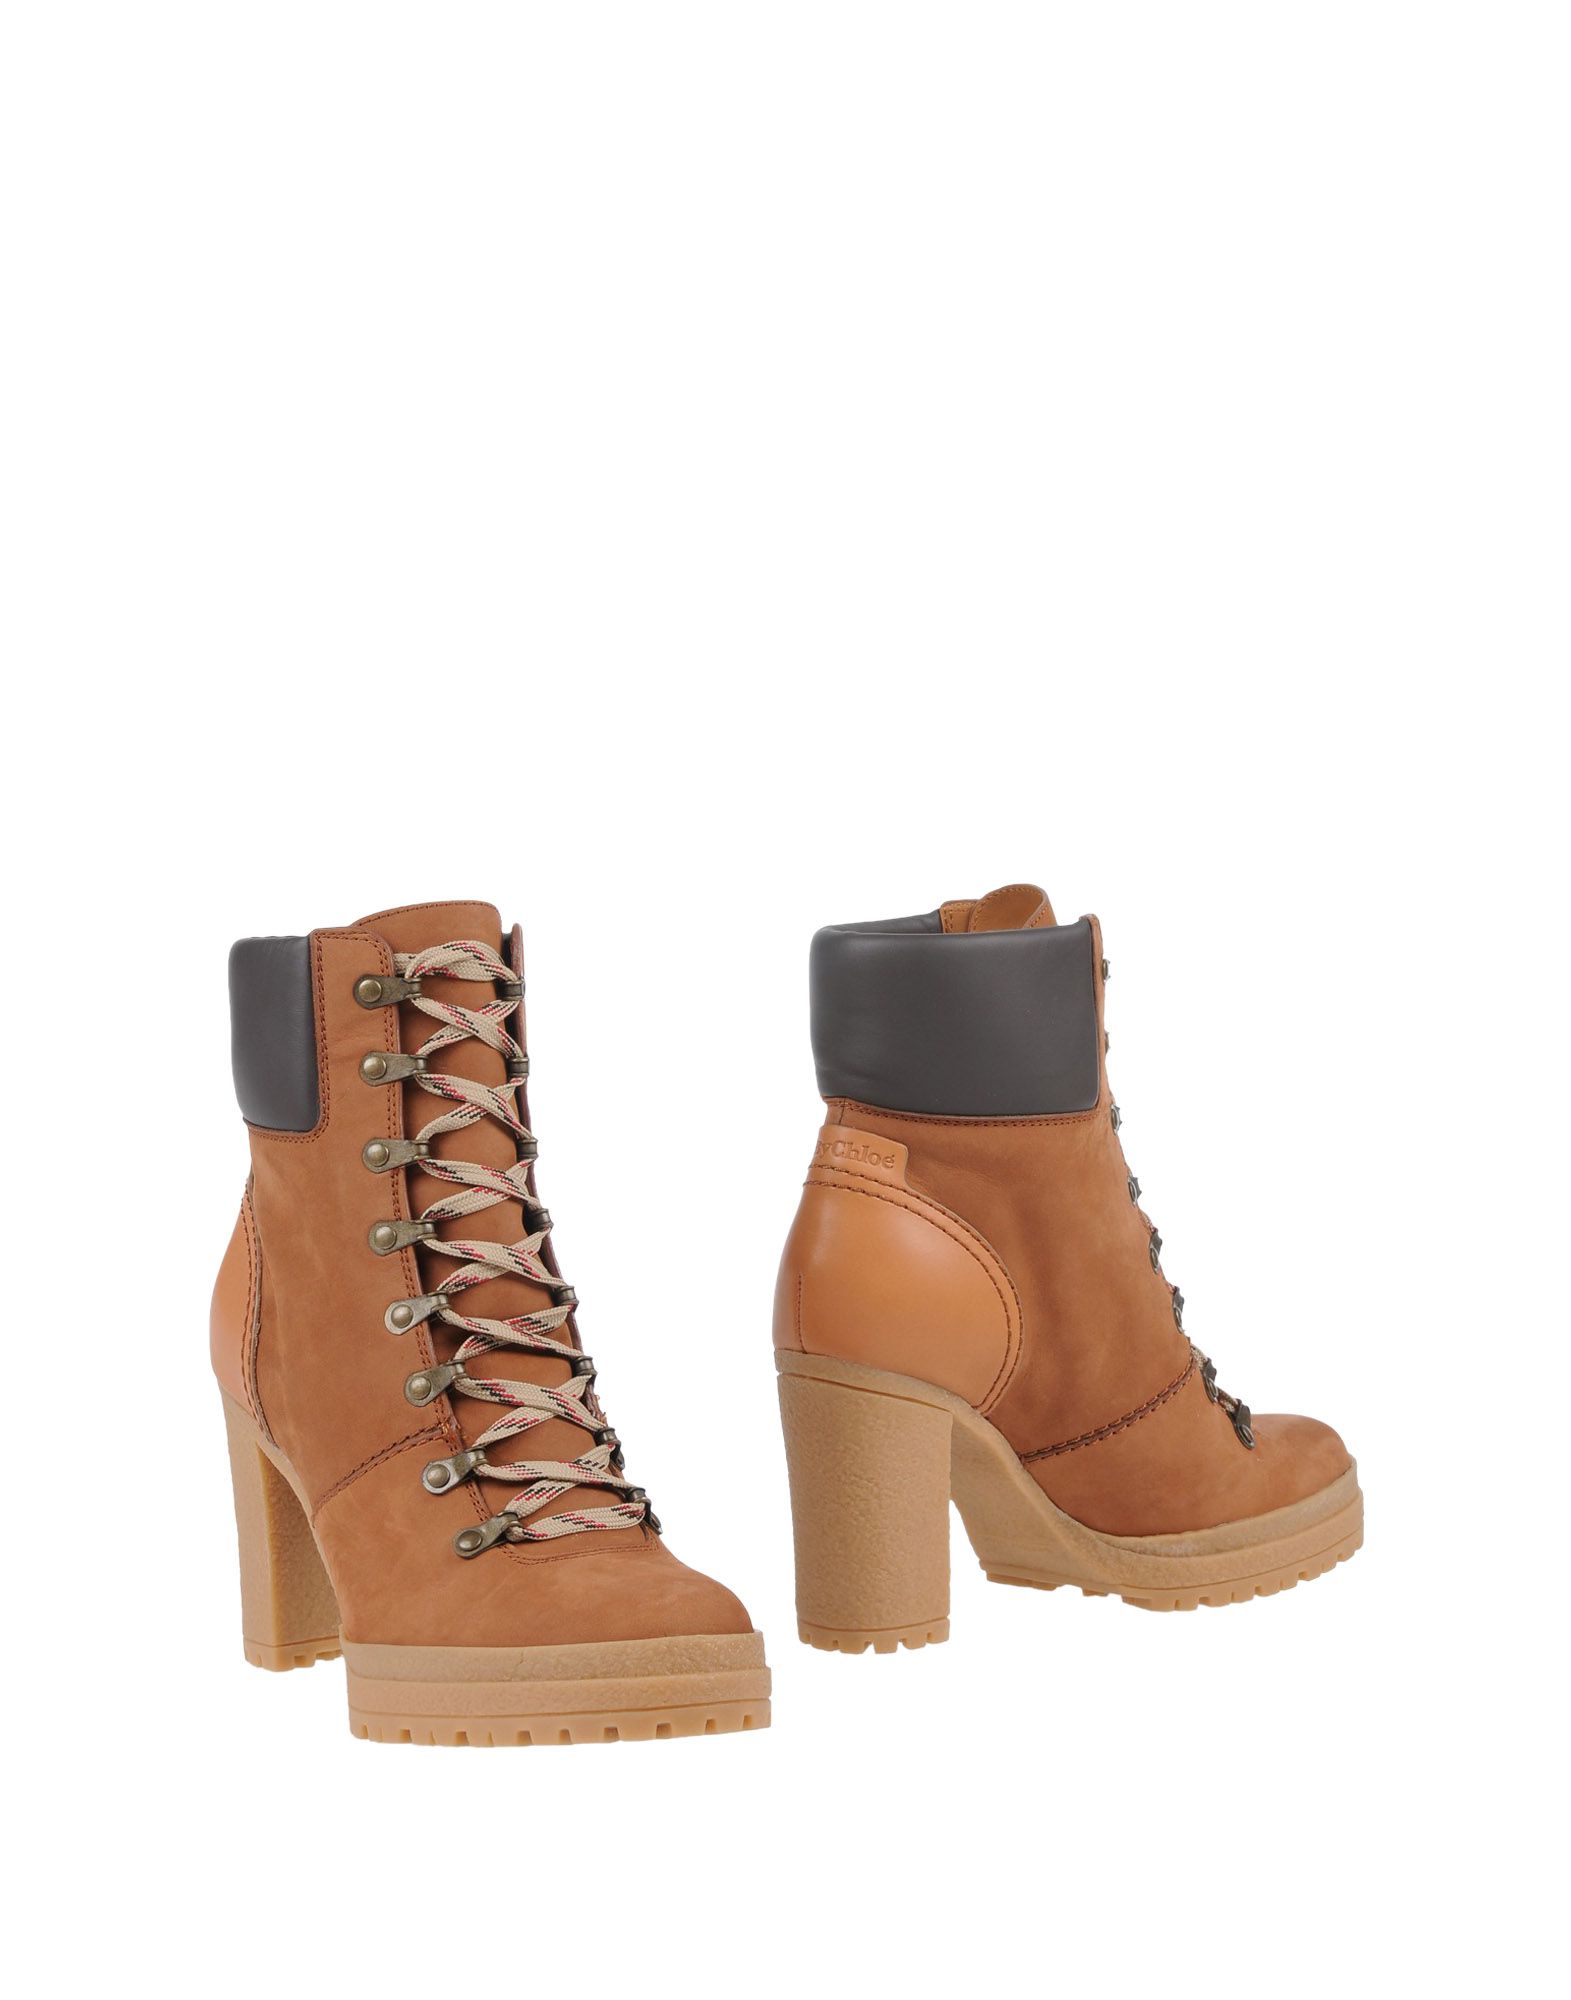 SEE BY CHLOÉ ANKLE BOOTS,11449158BQ 13